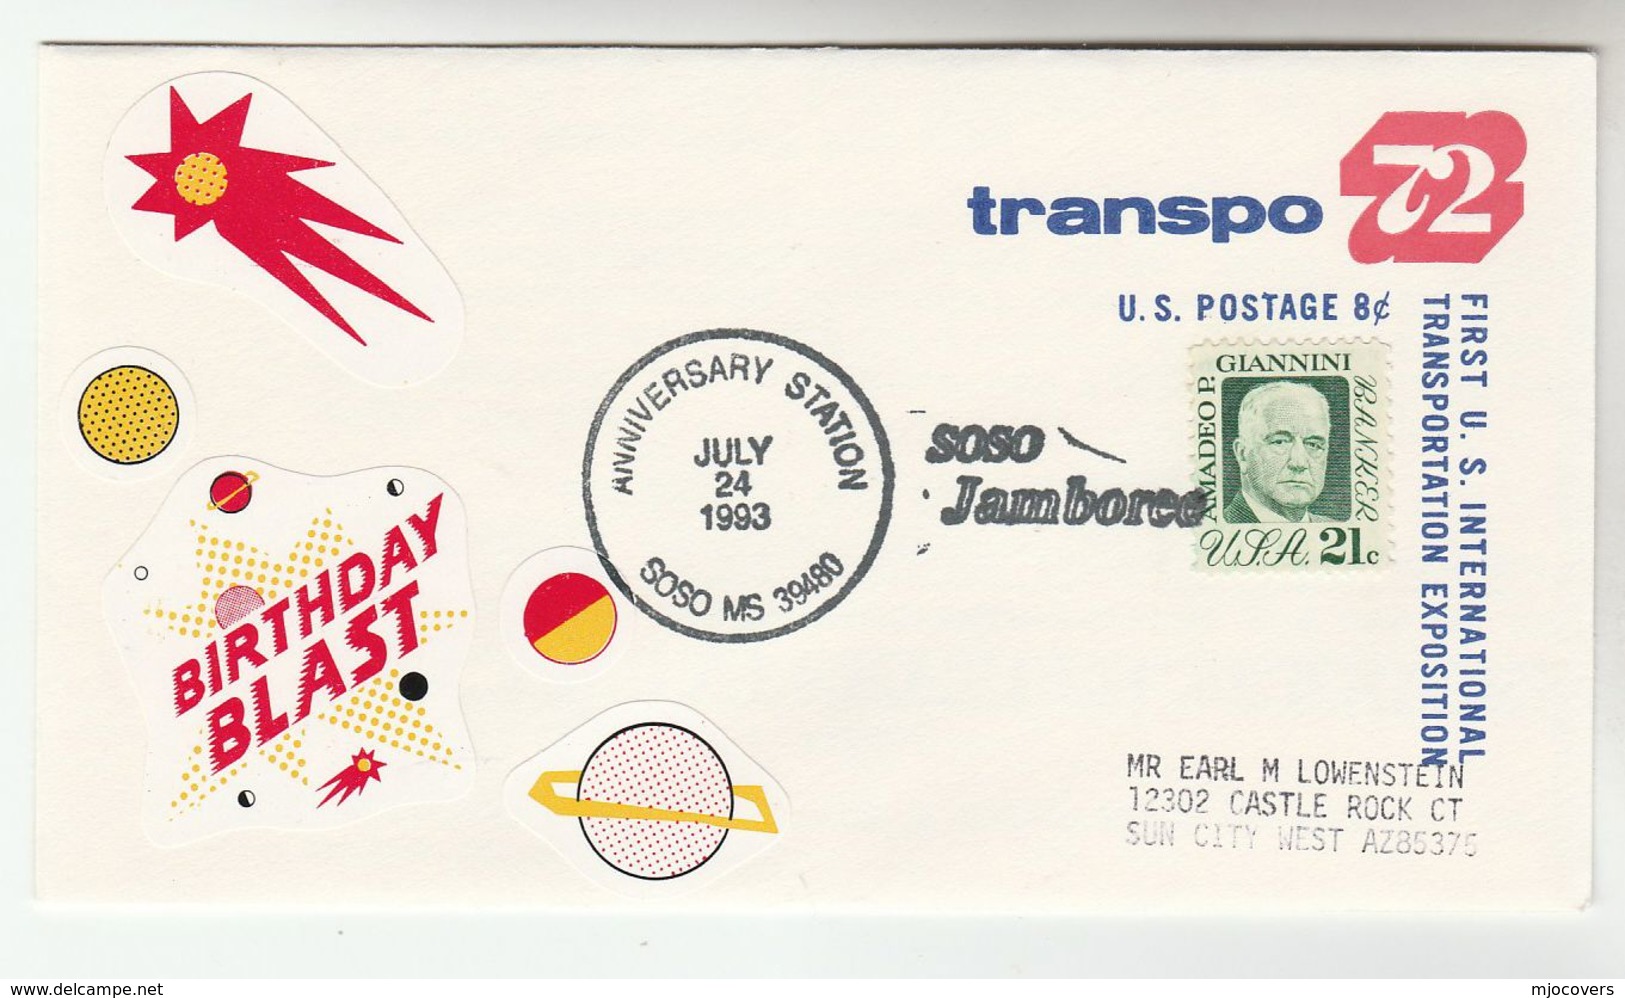 1993 SOSO JAMBOREE USA EVENT COVER  UPRATED Postal STATIONERY  Stamps COMET SPACE LABEL Astronomy - Astronomy